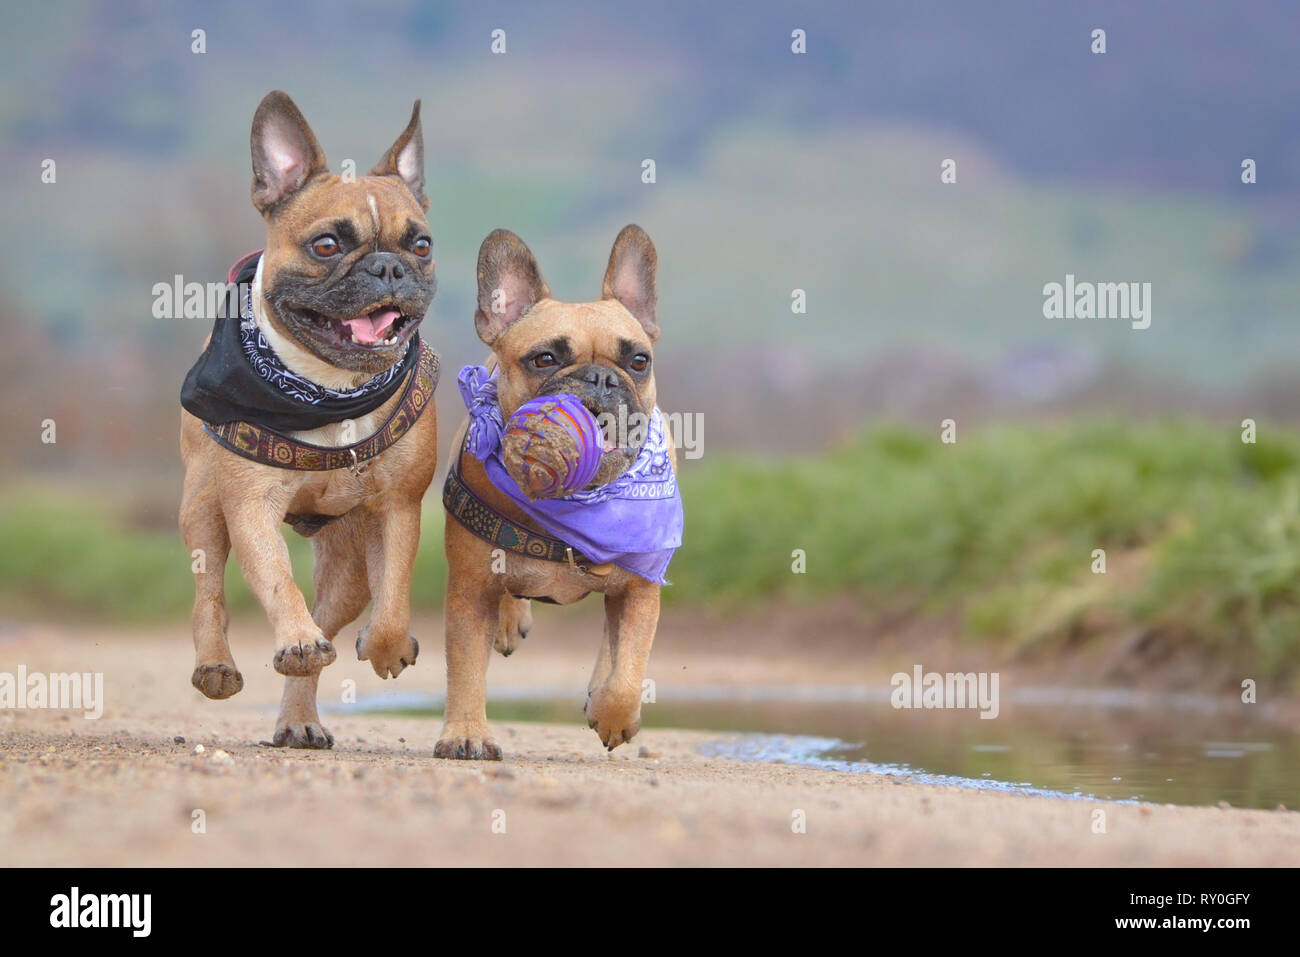 Action shot of two fawn French Bulldog dogs wearing neckerchief running together towards camera with ball toy in muzzle Stock Photo